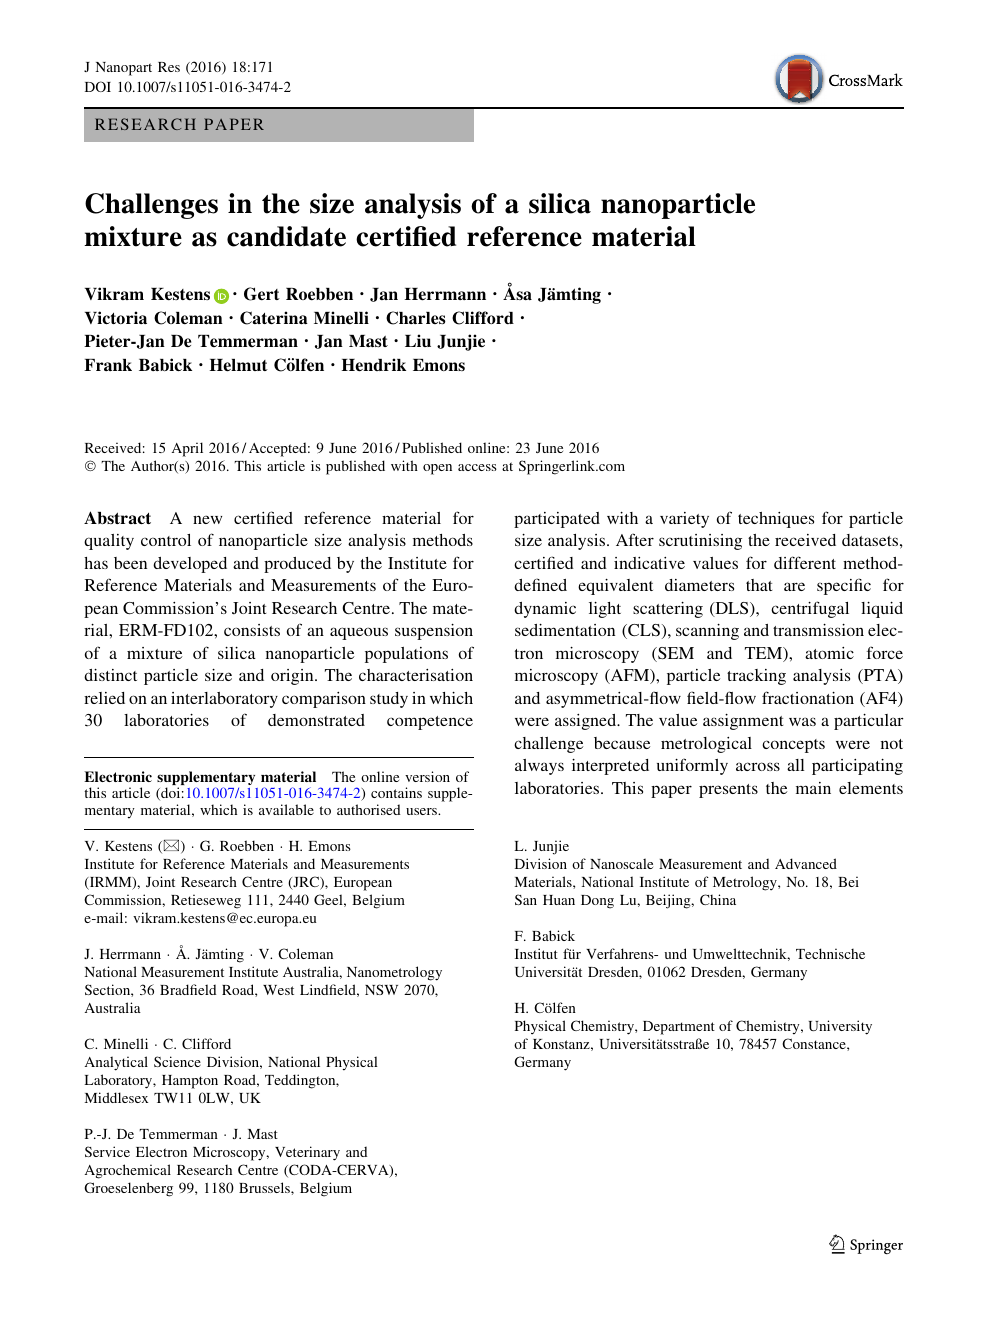 Challenges In The Size Analysis Of A Silica Nanoparticle Mixture As Candidate Certified Reference Material Topic Of Research Paper In Chemical Sciences Download Scholarly Article Pdf And Read For Free On